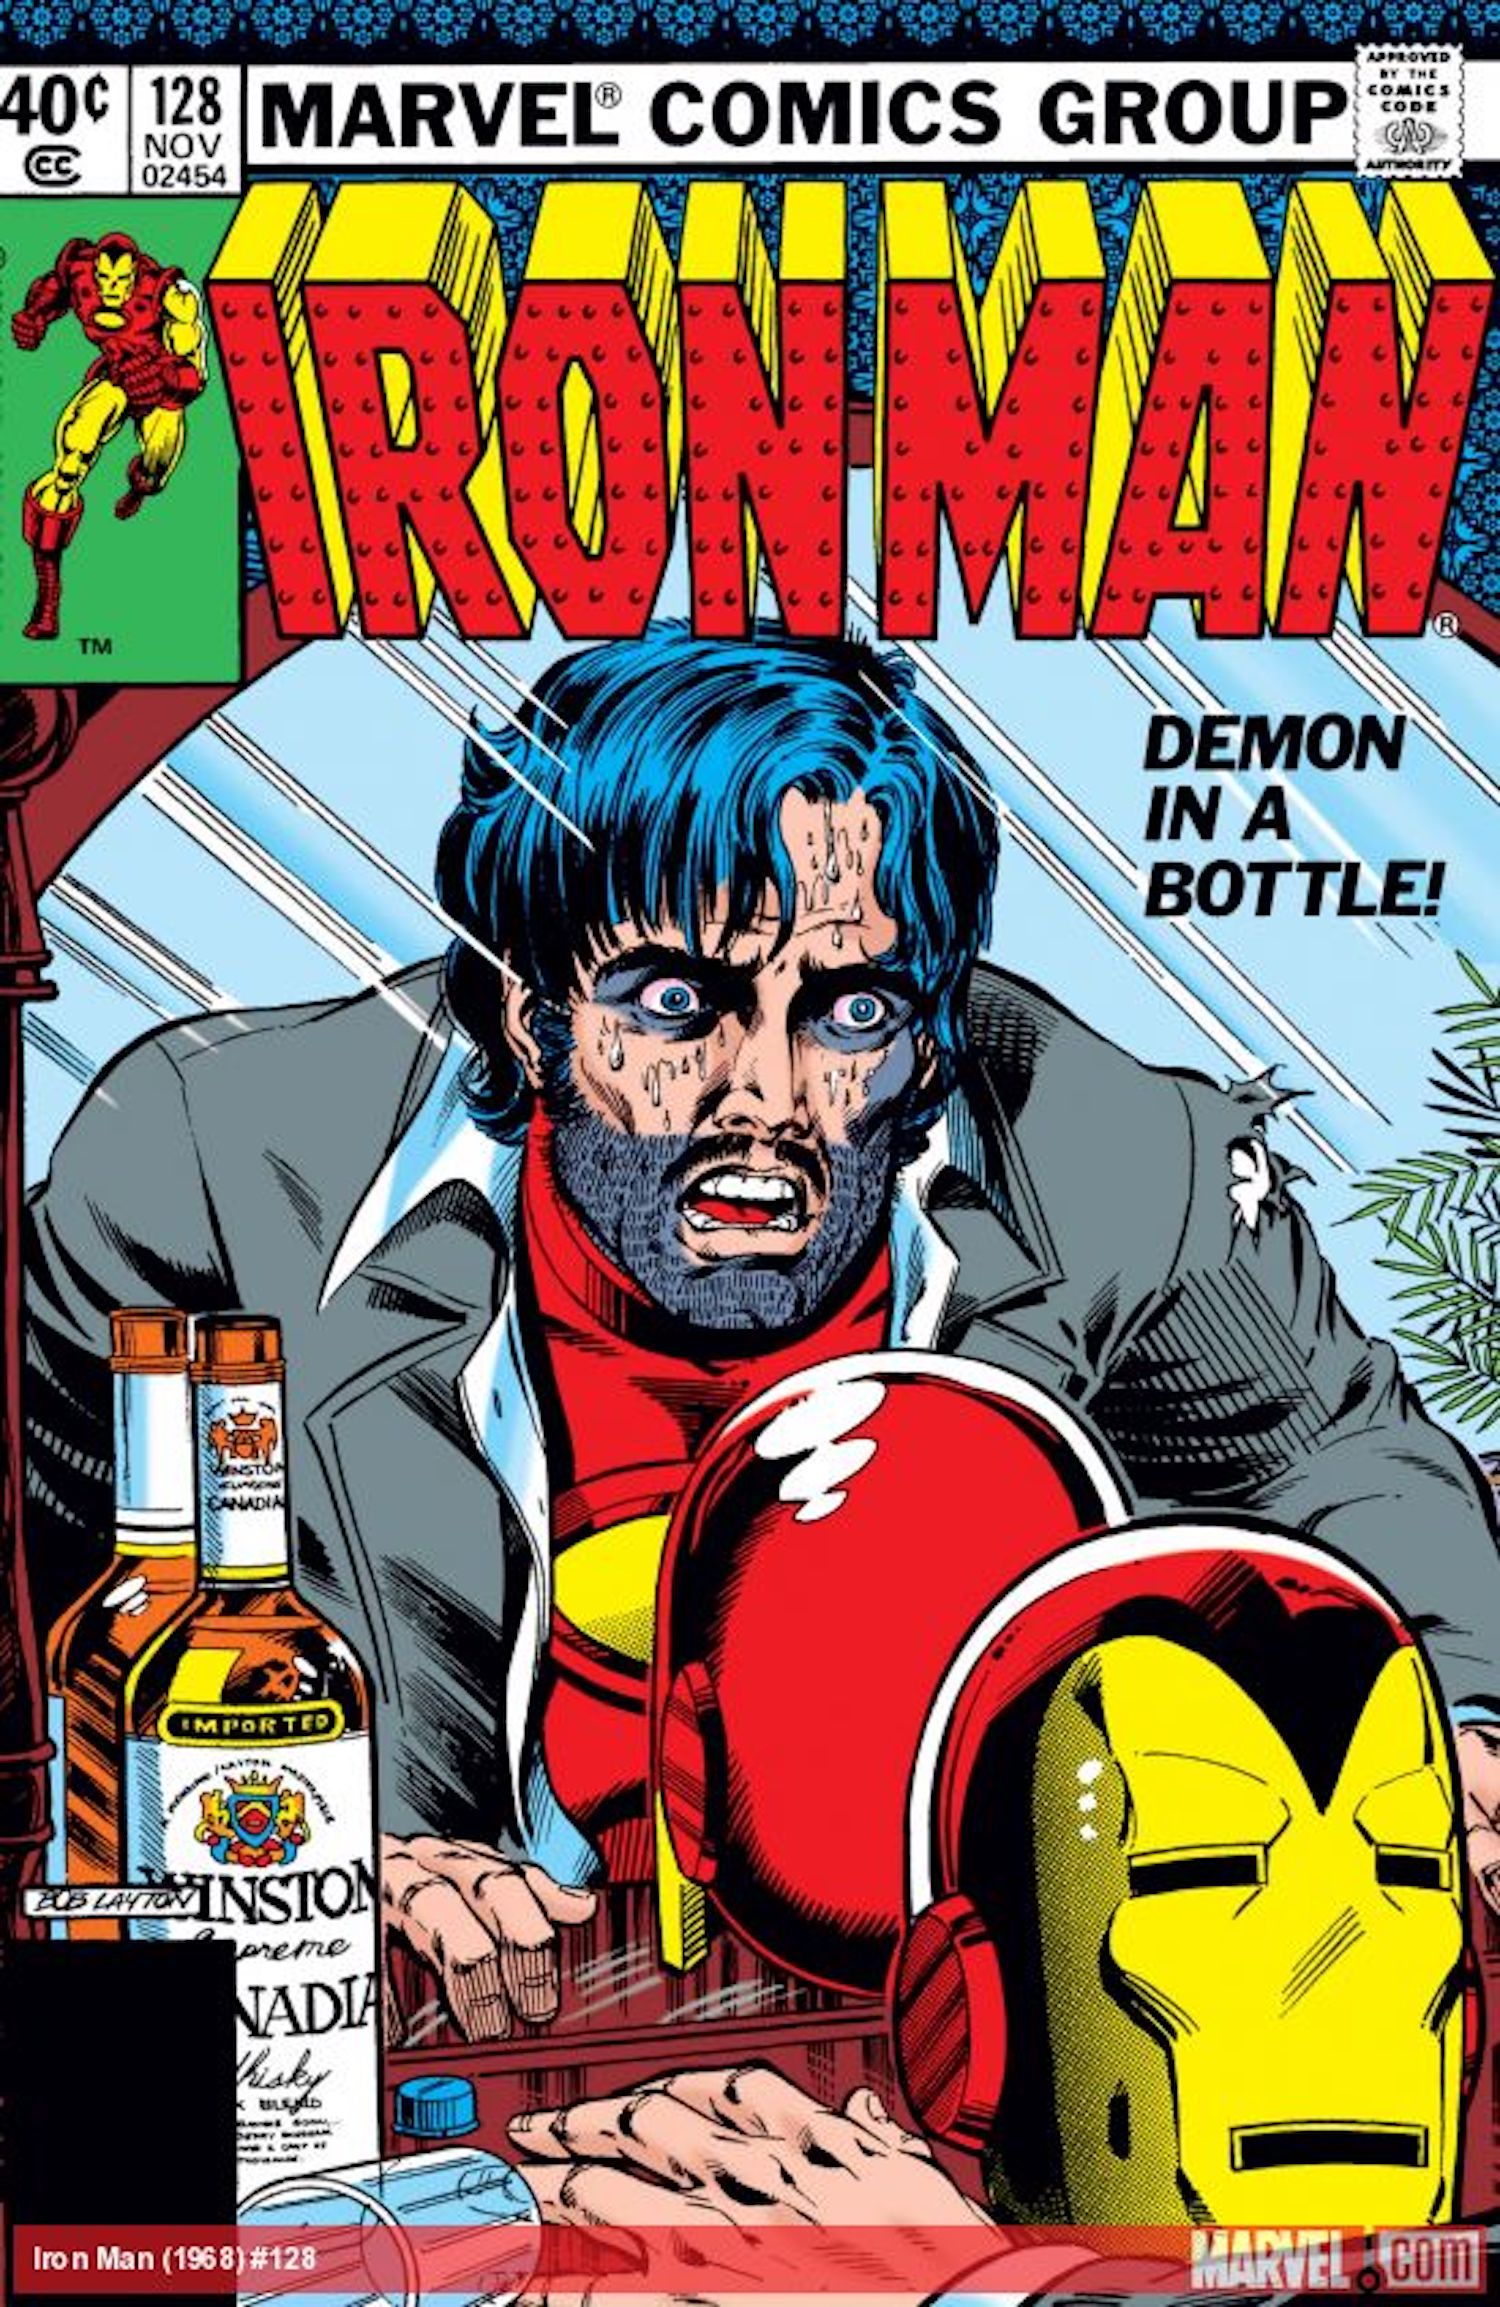 This image is the cover of Iron Man Vol. 1 #128 (1979), where Tony Stark is seen staring himself in the mirror, looking drunk and completely disheveled. 